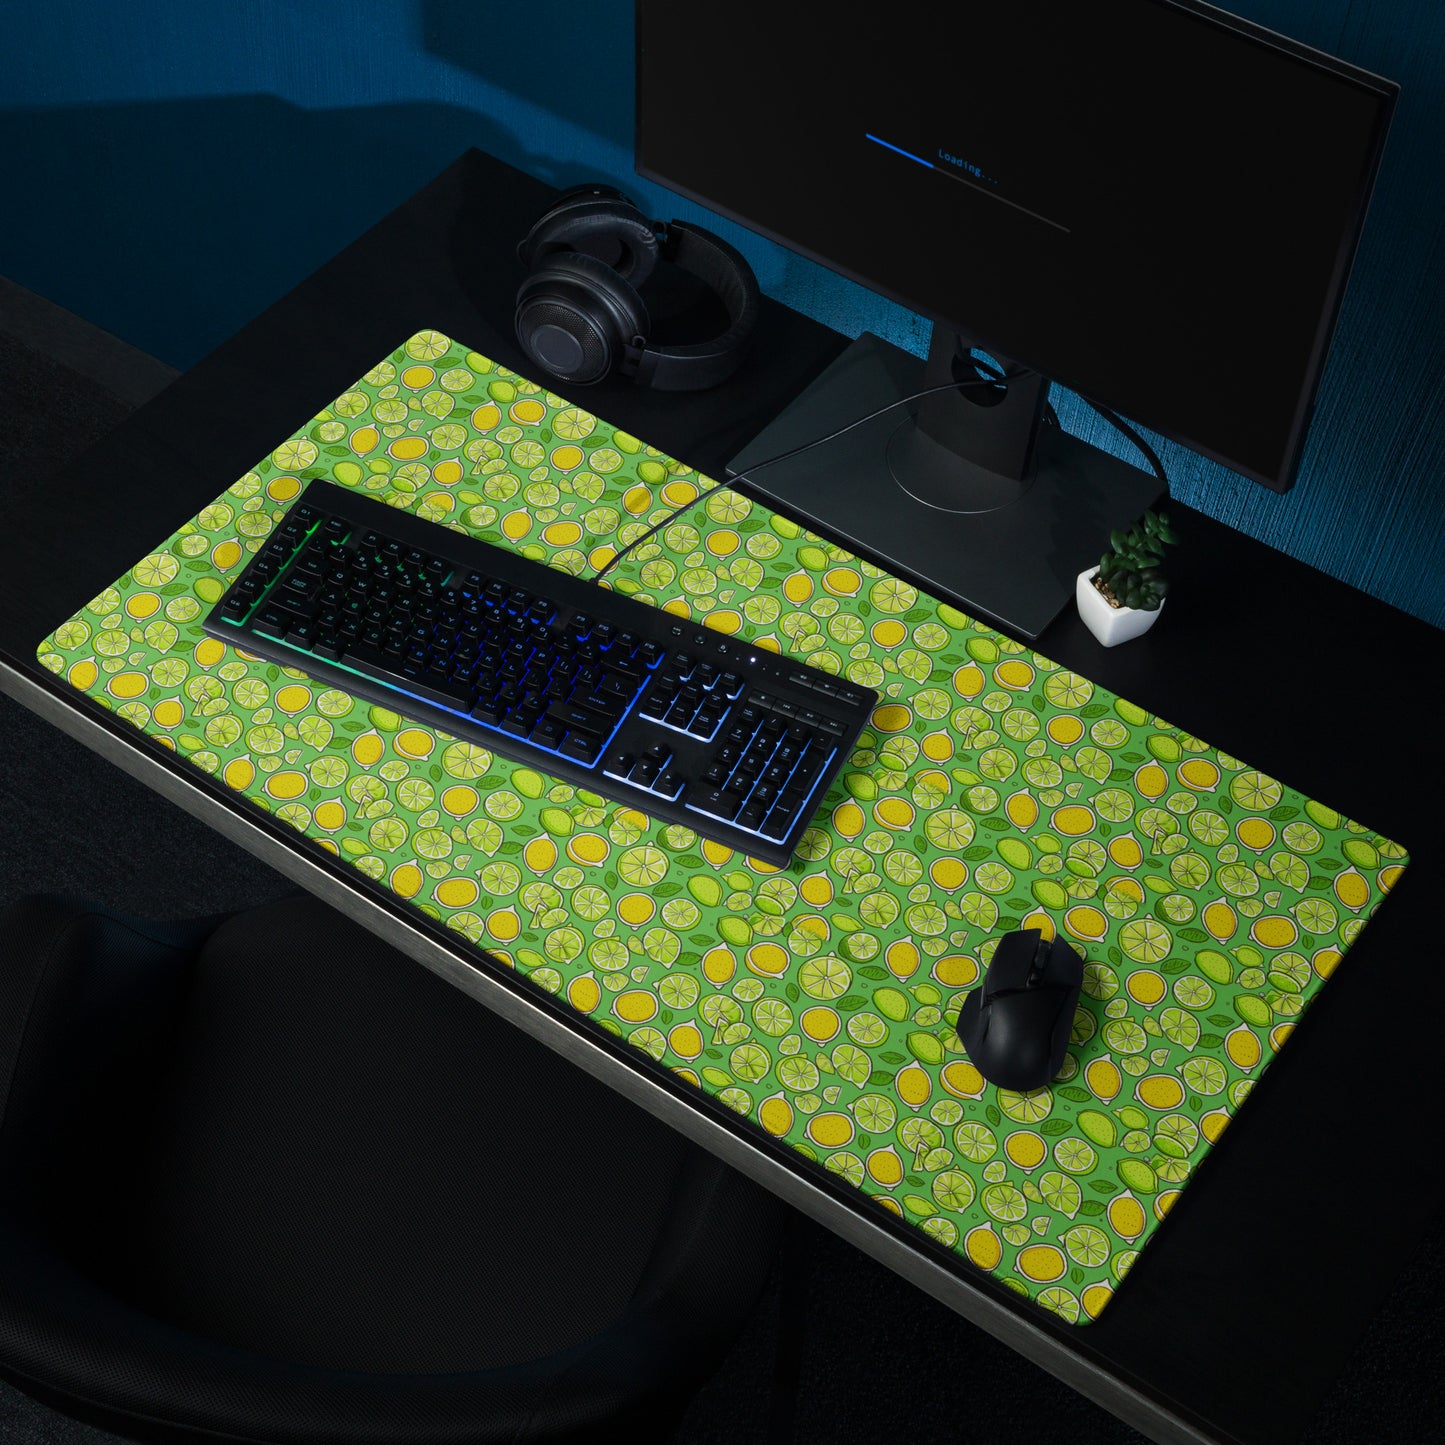 A 36" x 18" gaming desk pad with lemons and limes on a green background. A keyboard and mouse sit on it.